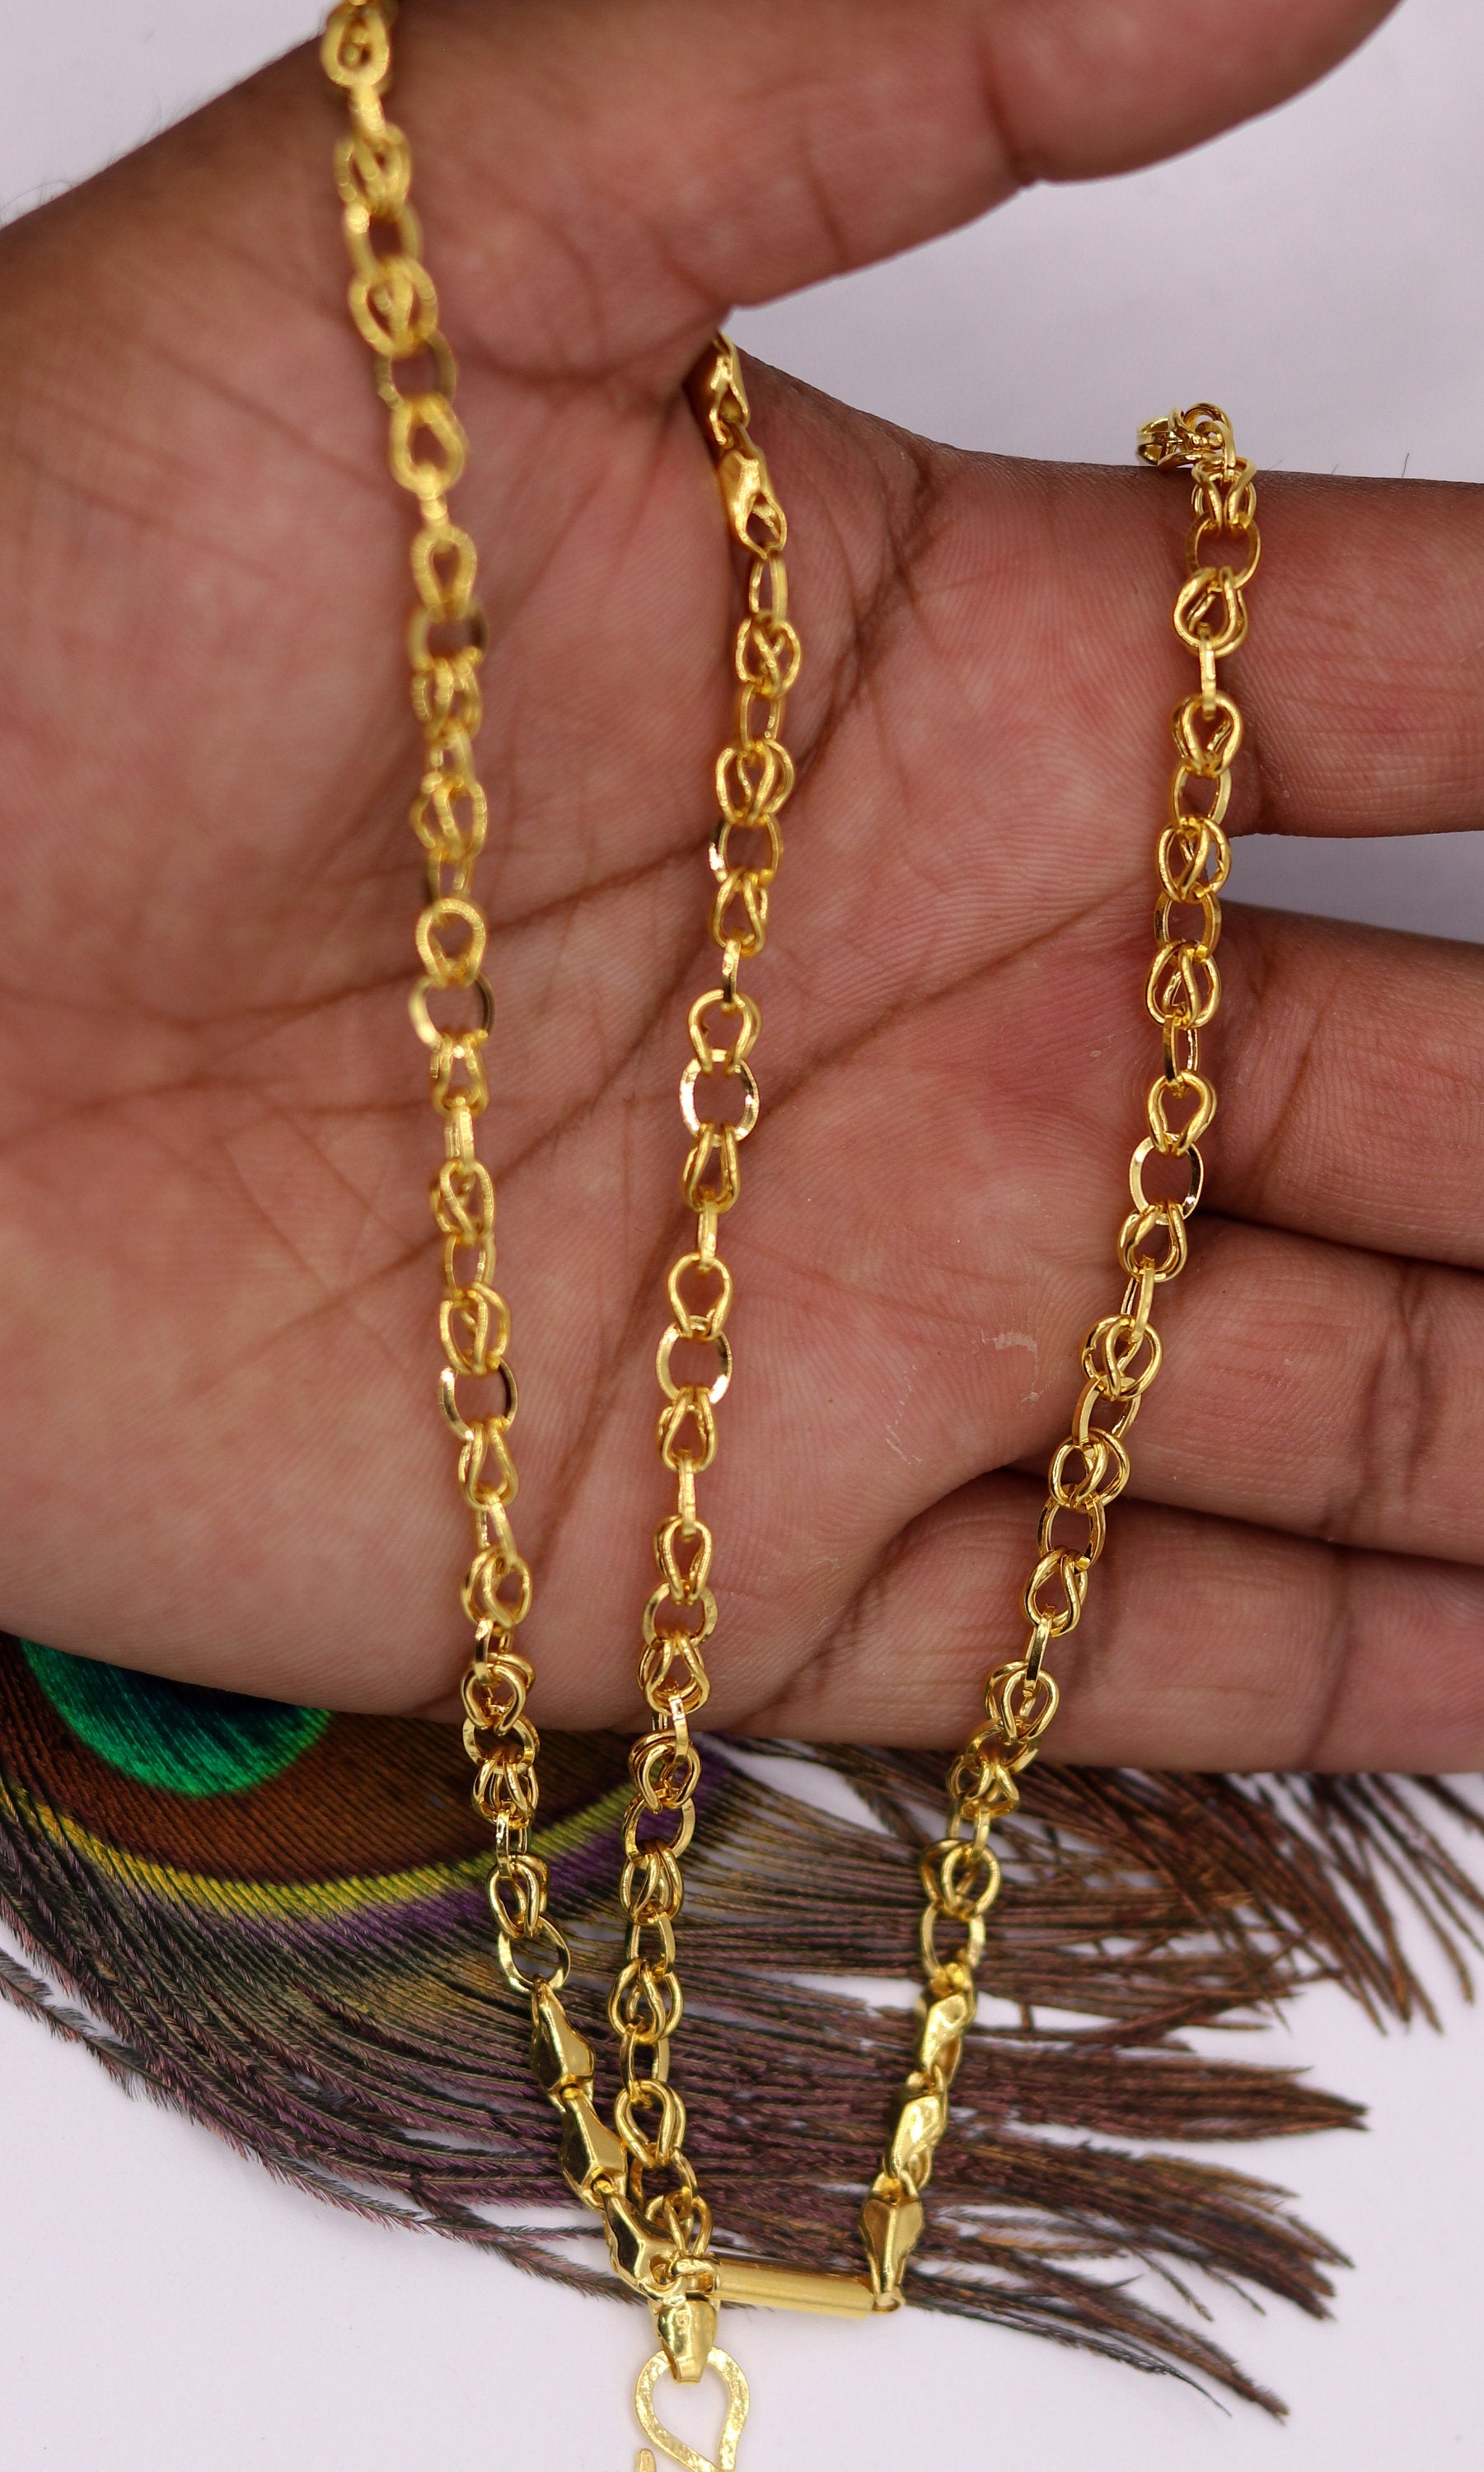 Vintage design handmade 22kt yellow gold fabulous link chain unisex gifting  necklace chain with amazing design ch187